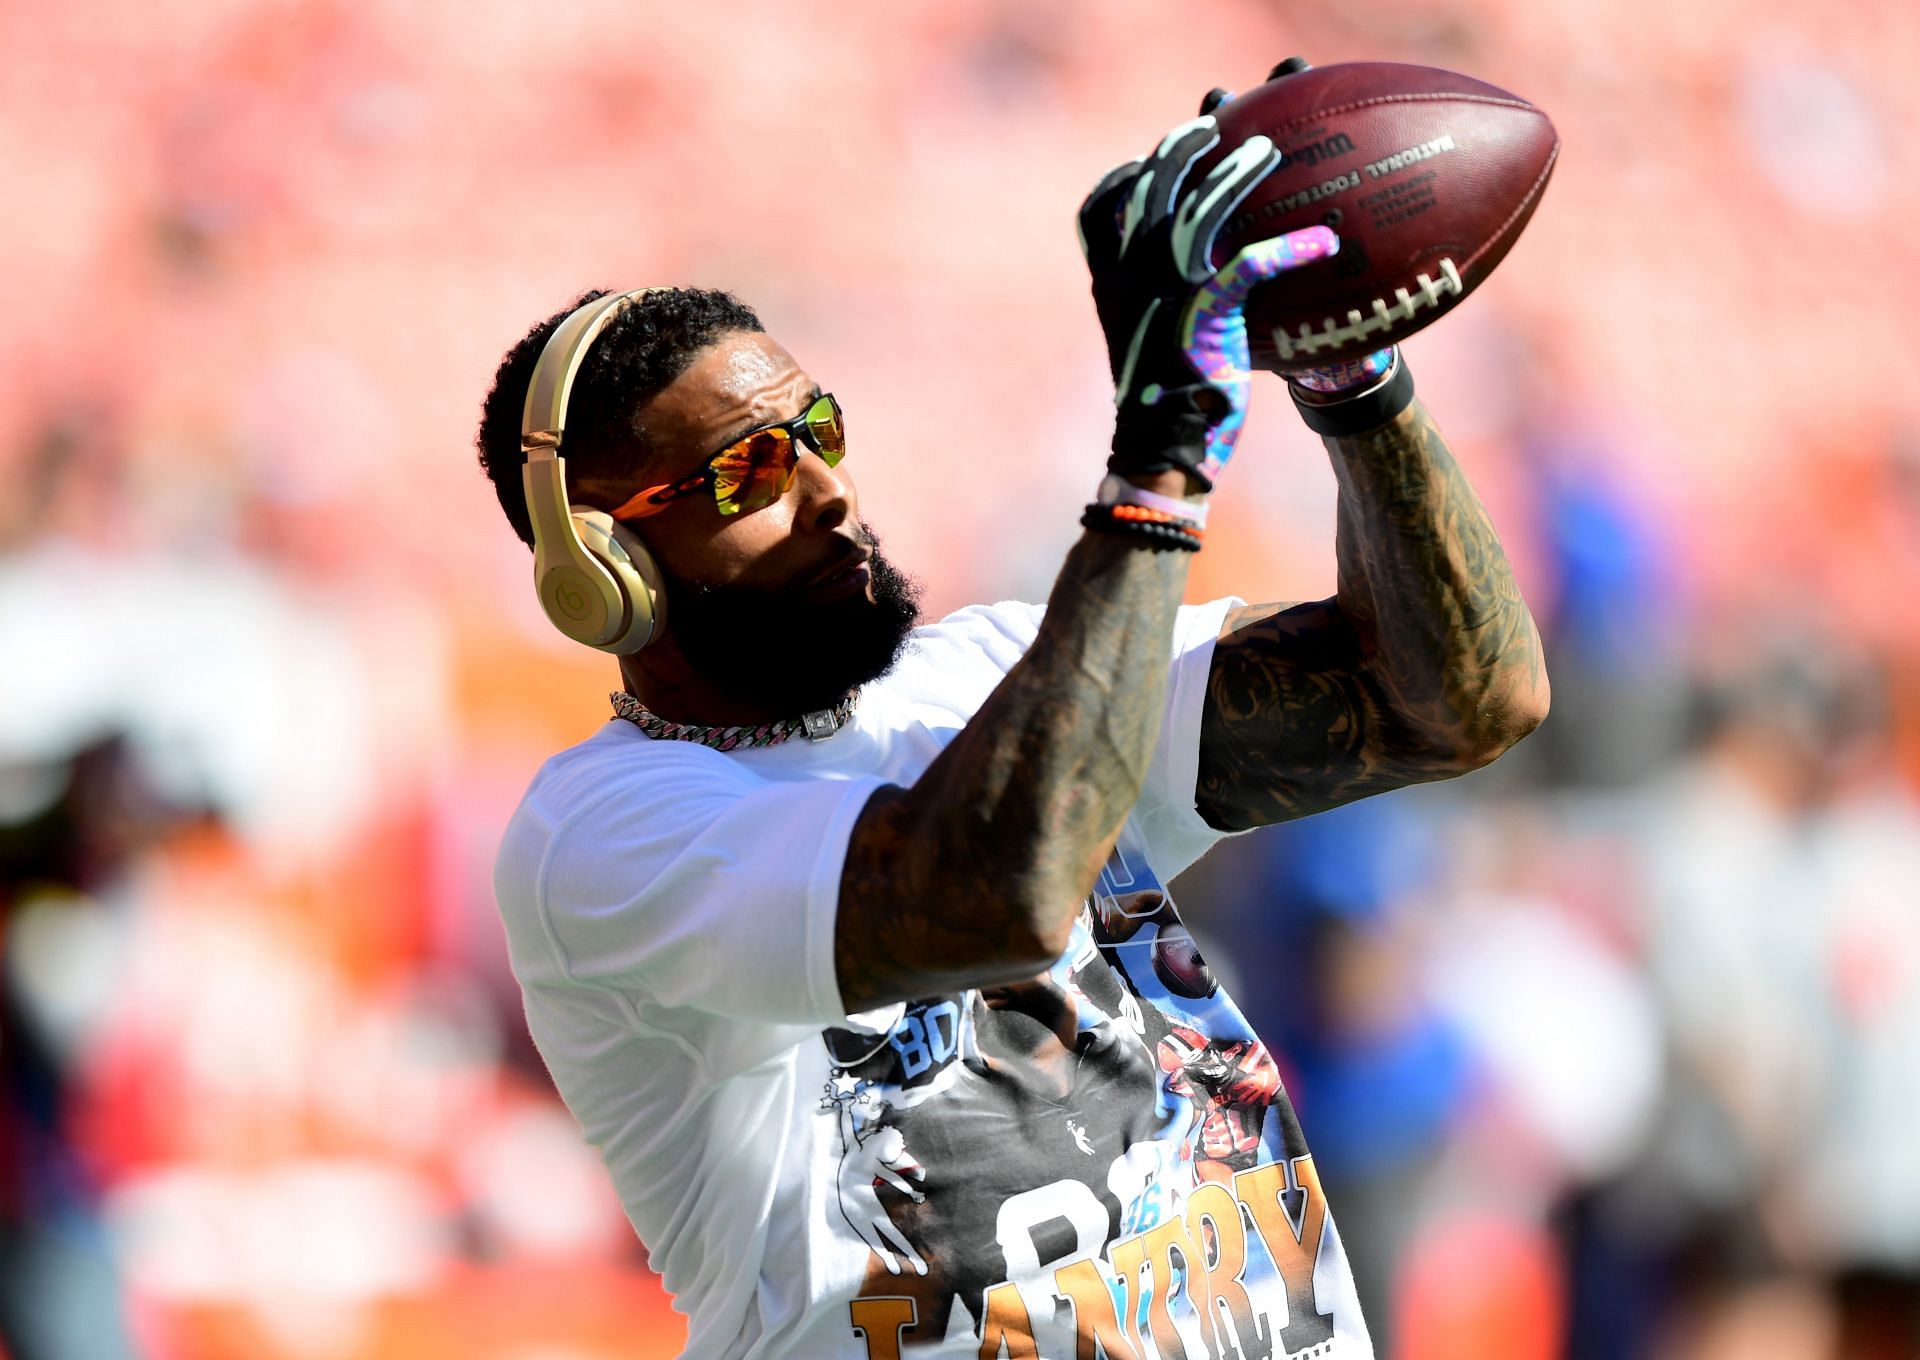 NFL wide receiver Odell Beckham Jr. is on the waiver wire after being released.